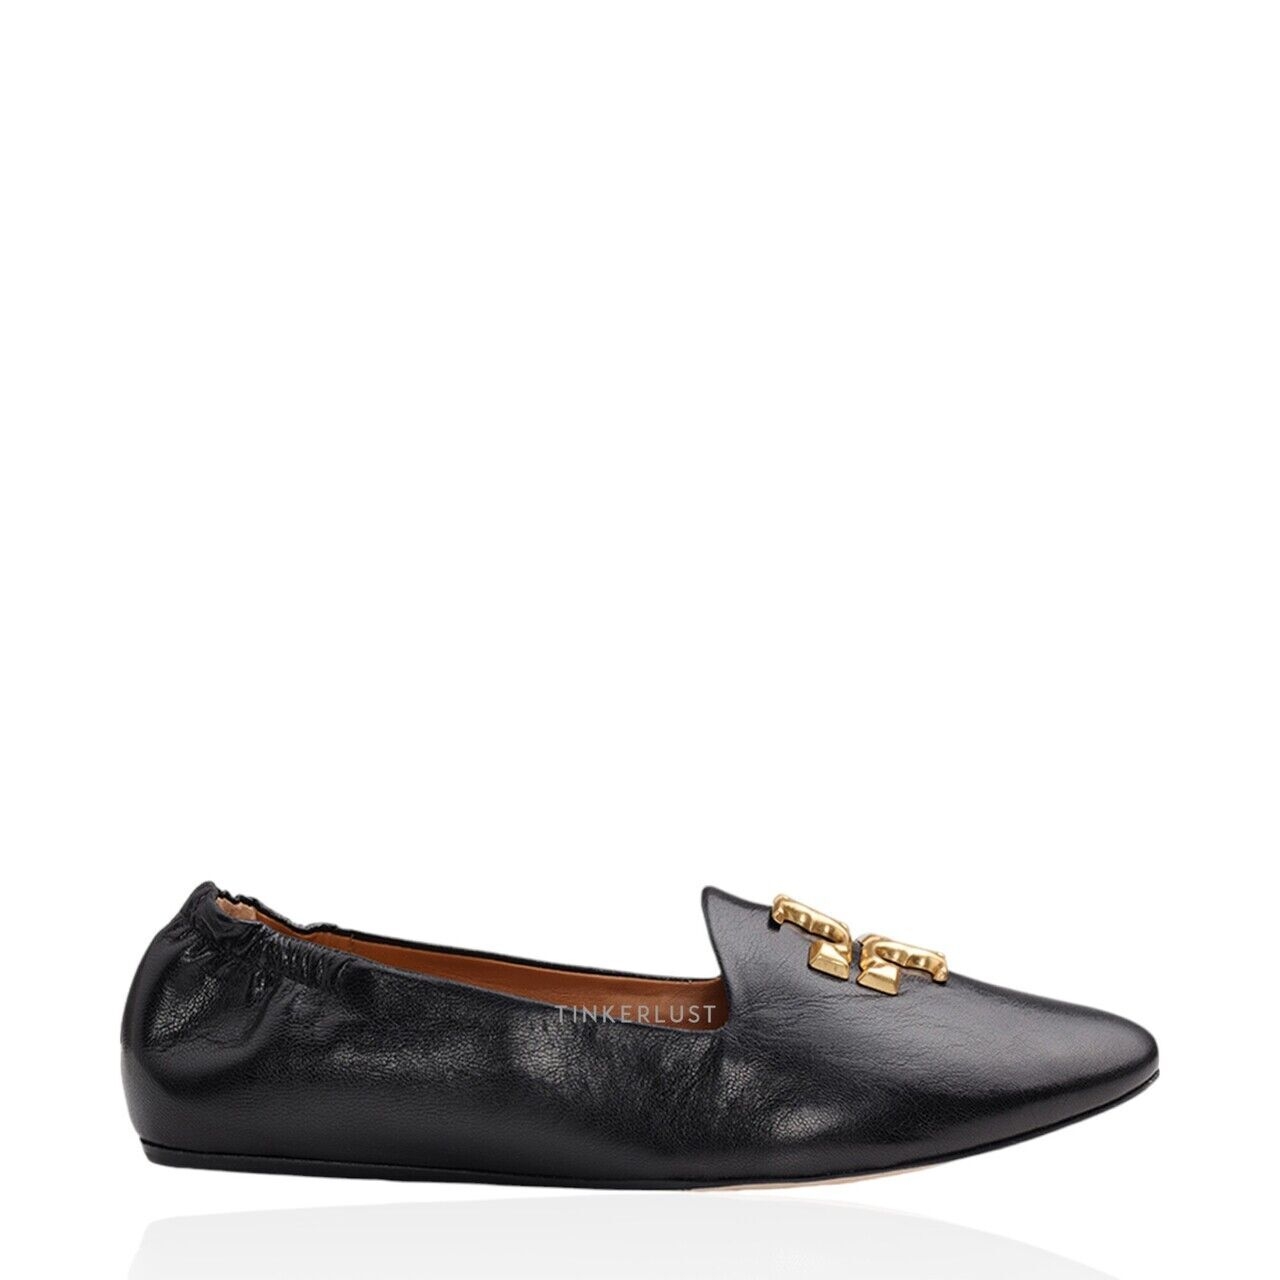 Tory Burch Eleanor Loafers in Perfect Black Flats